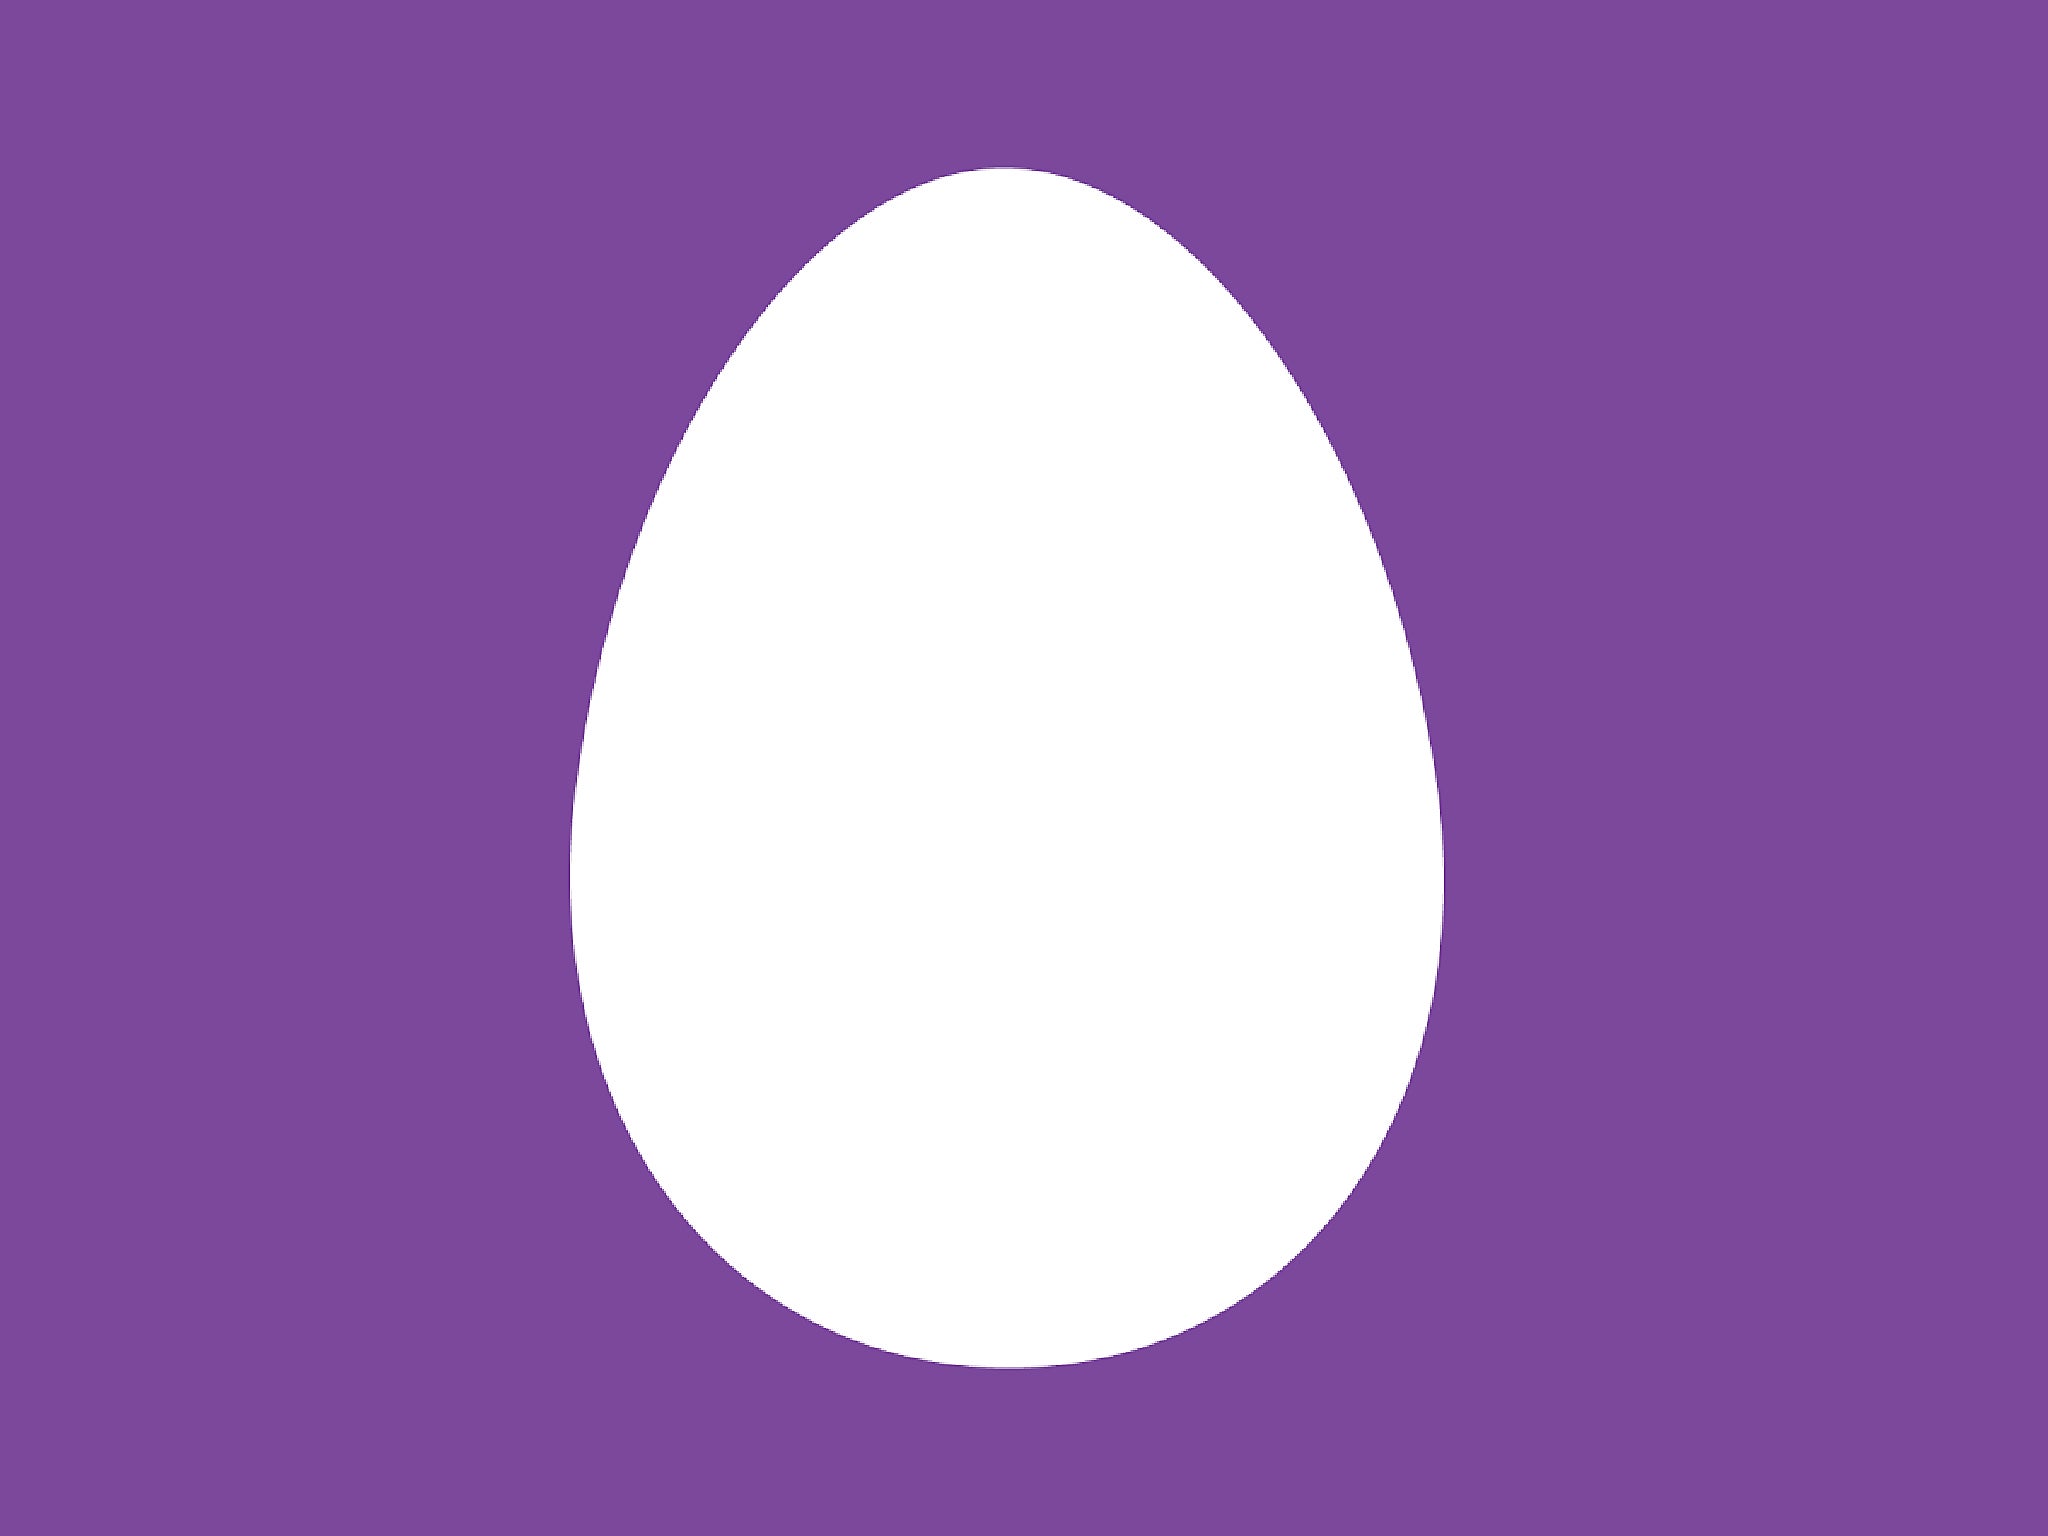 The Twitter egg was hatched in 2010